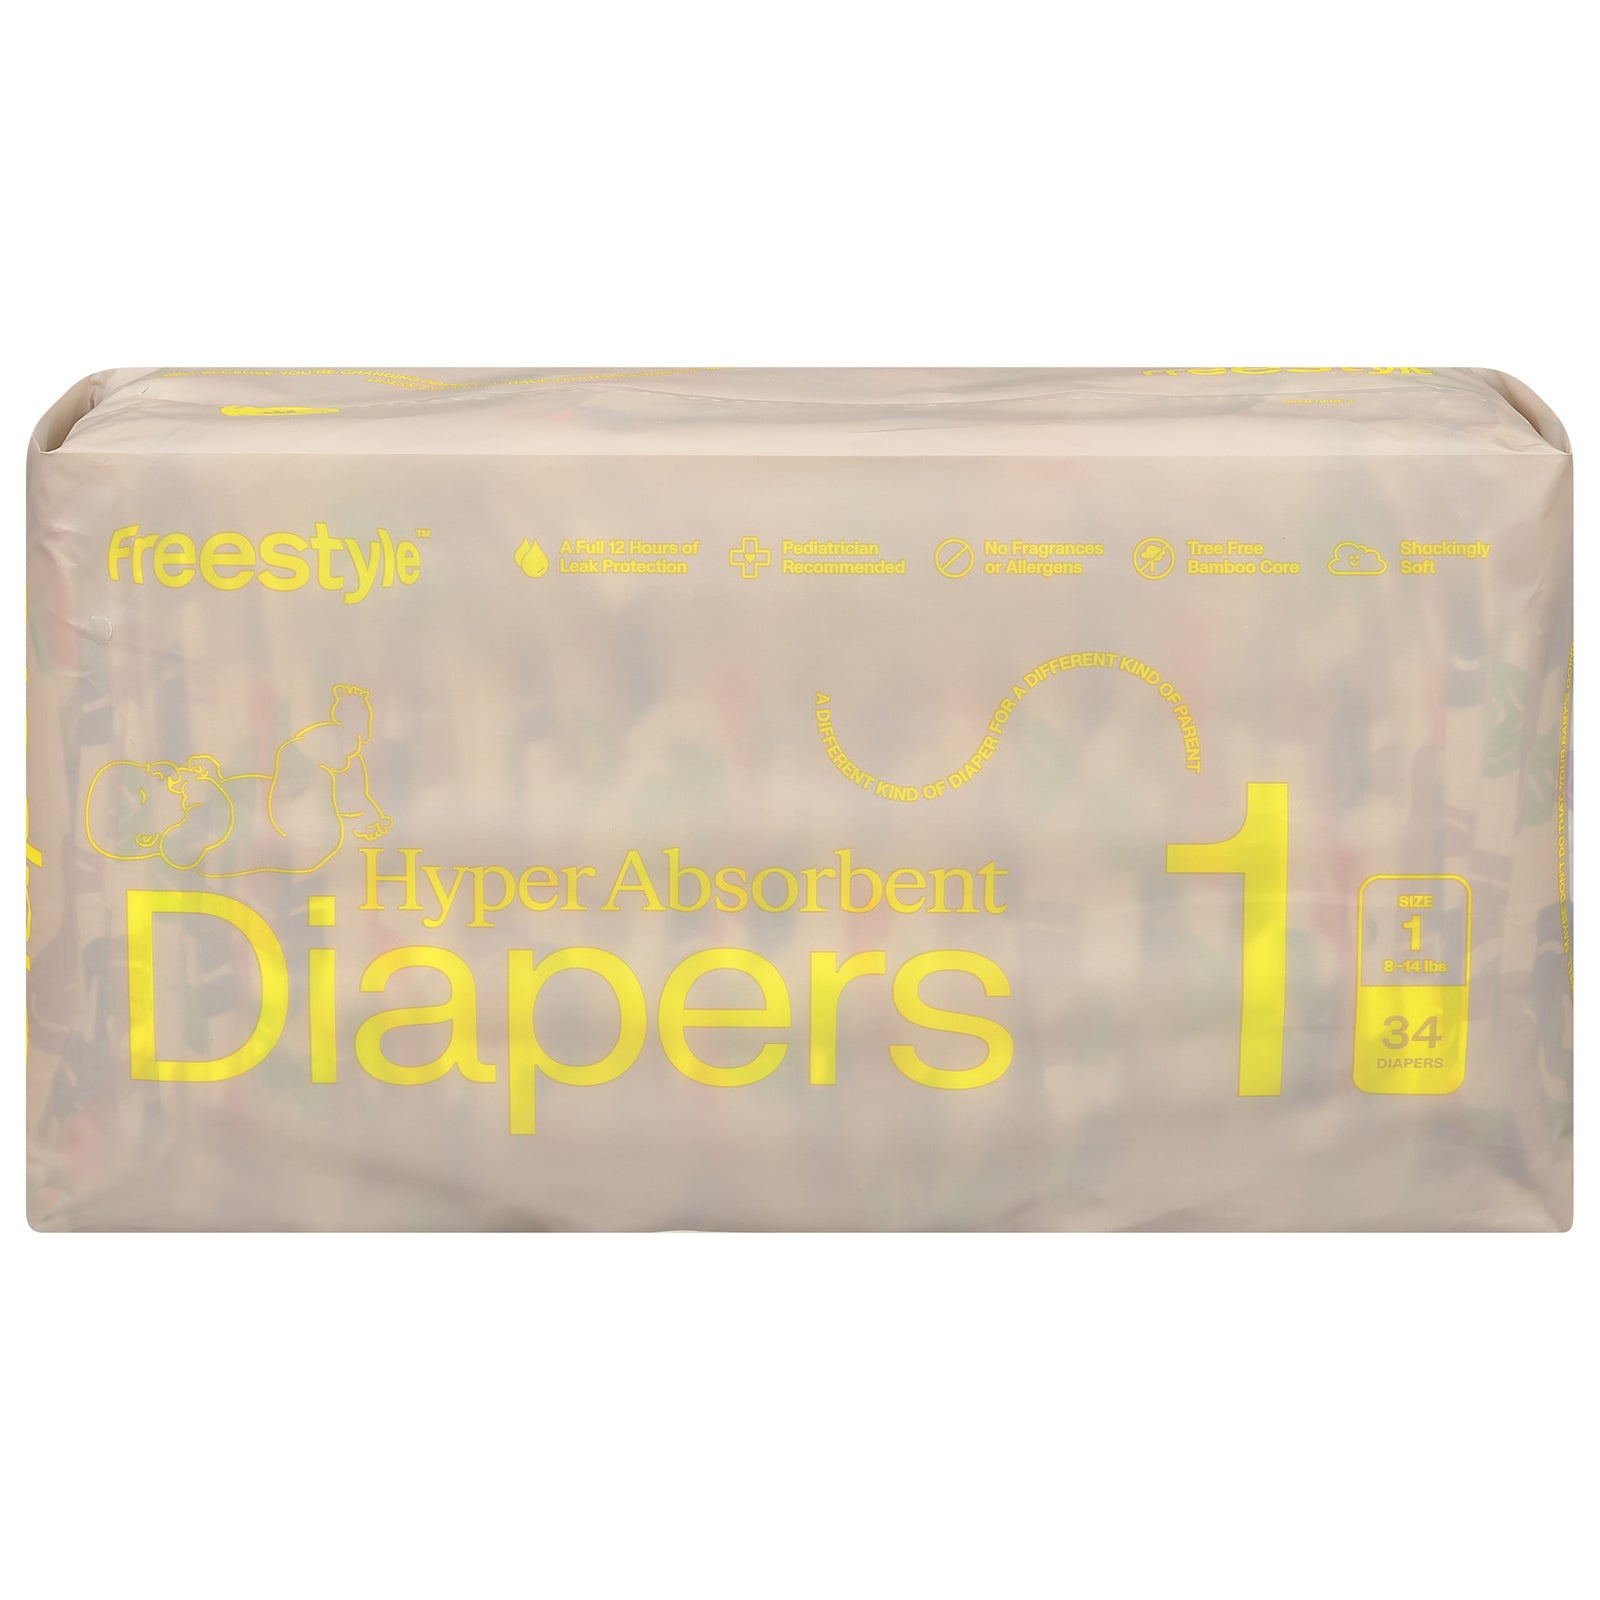 Freestyle - Diapers Baby.size 1 - Case of 6-34 CT